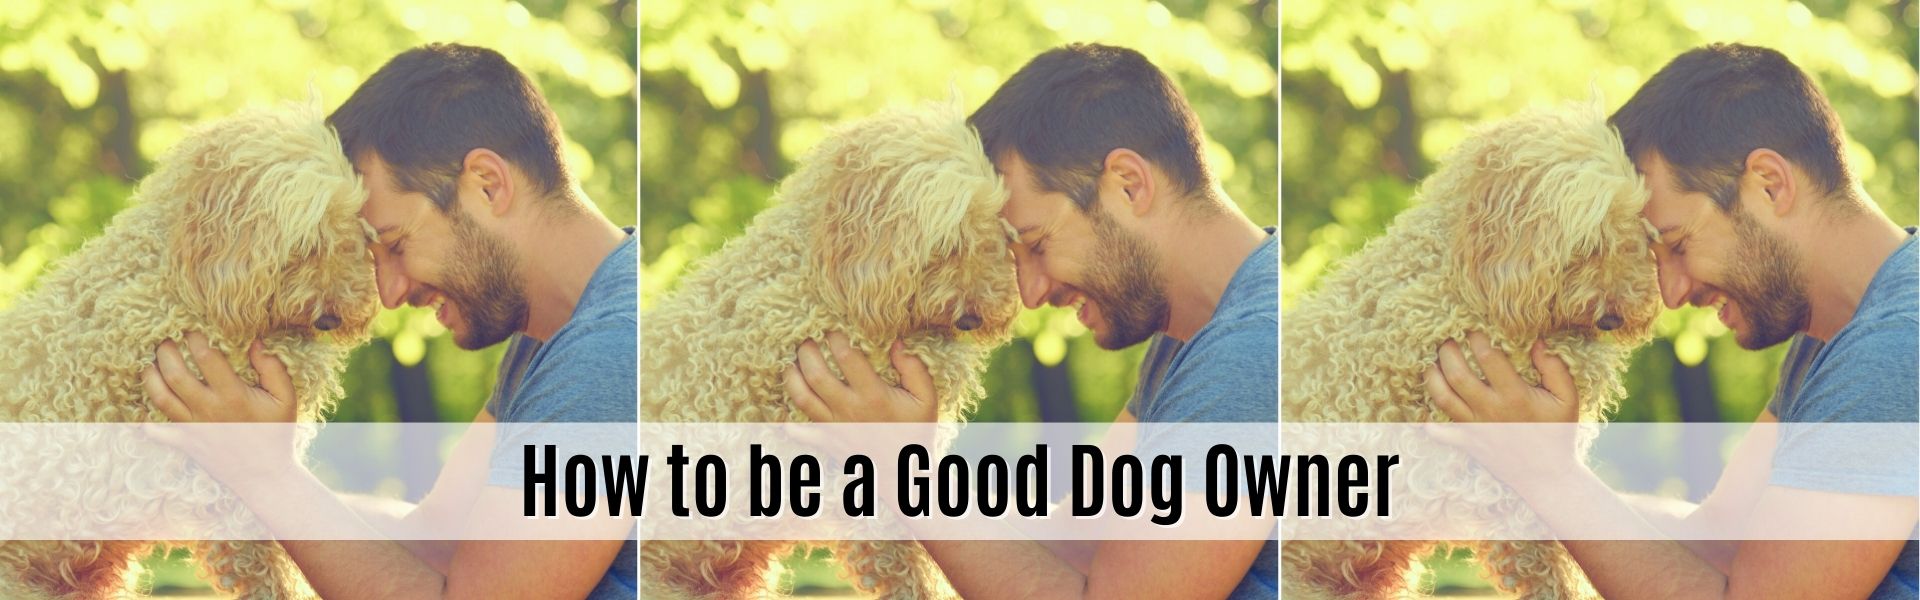 how to be a good dog owner